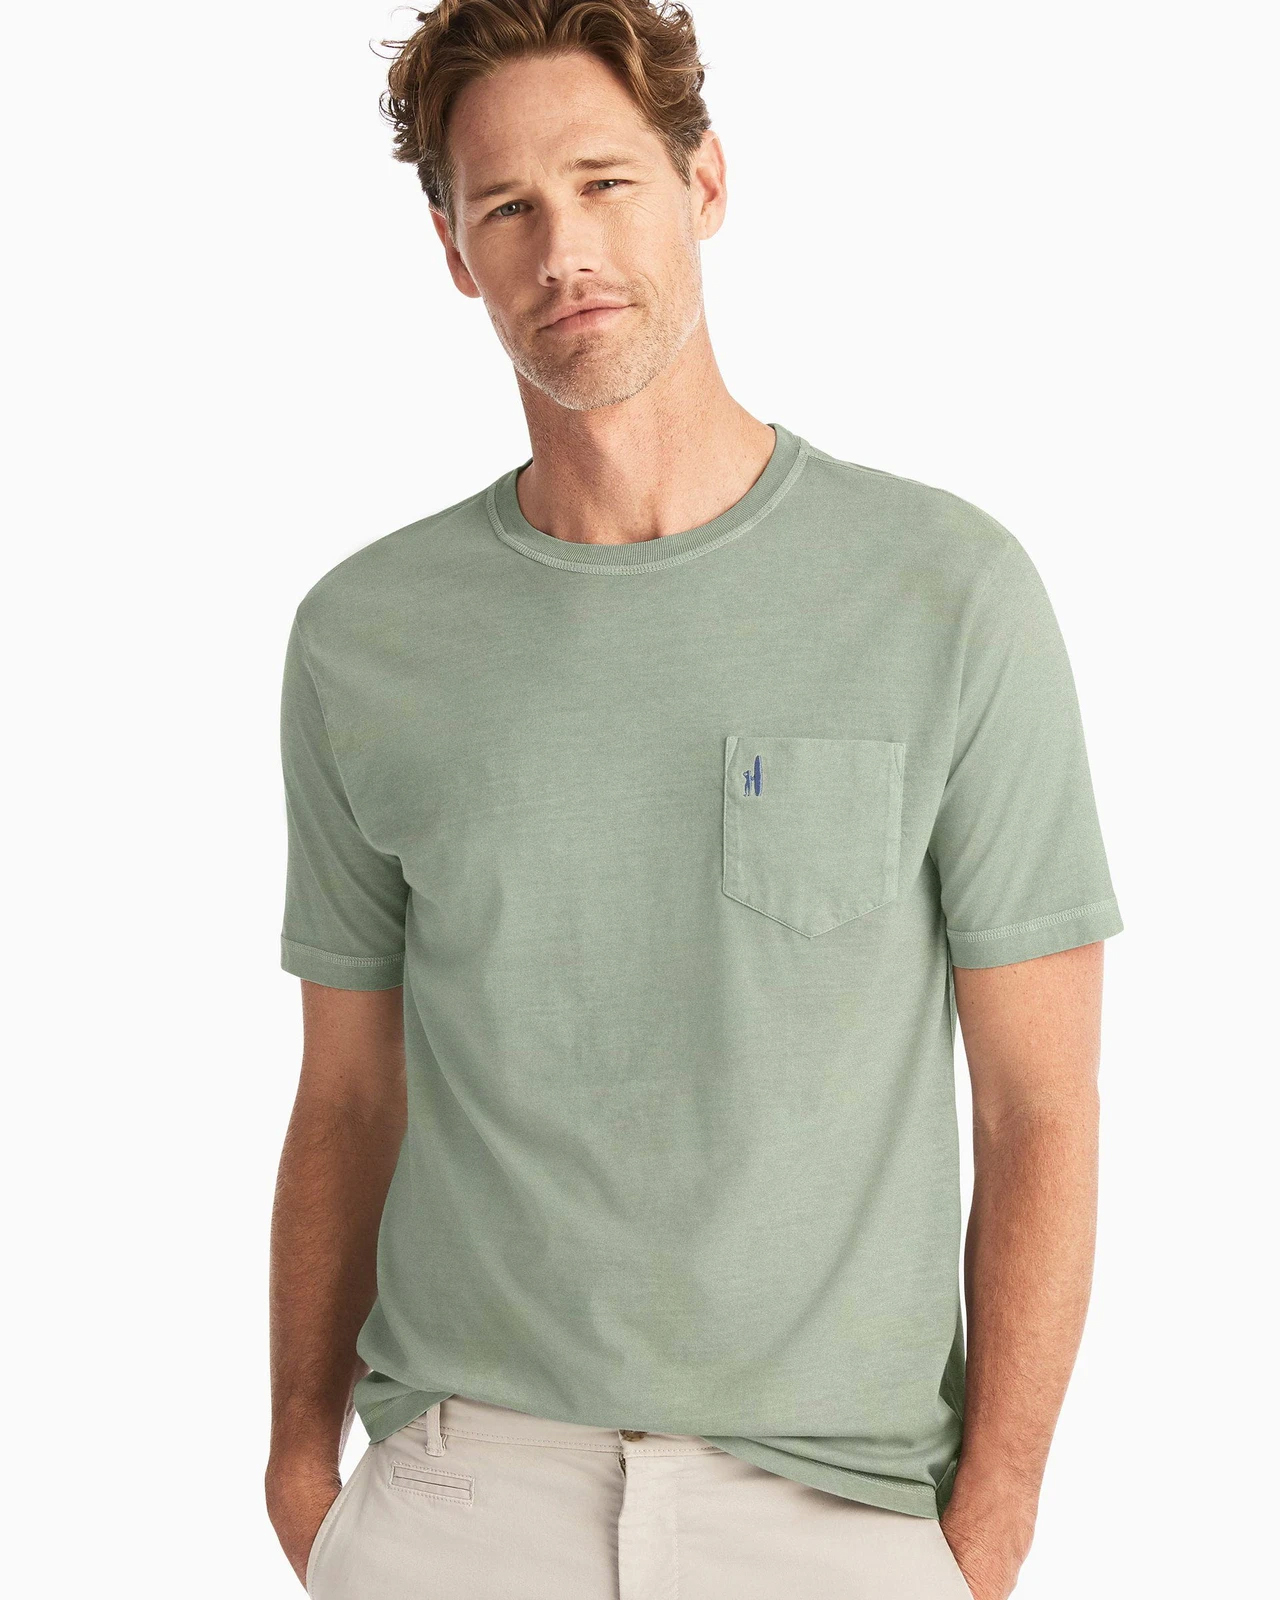 Golf T-shirts 2020: Our 9 favorite options for any casual occasion ...